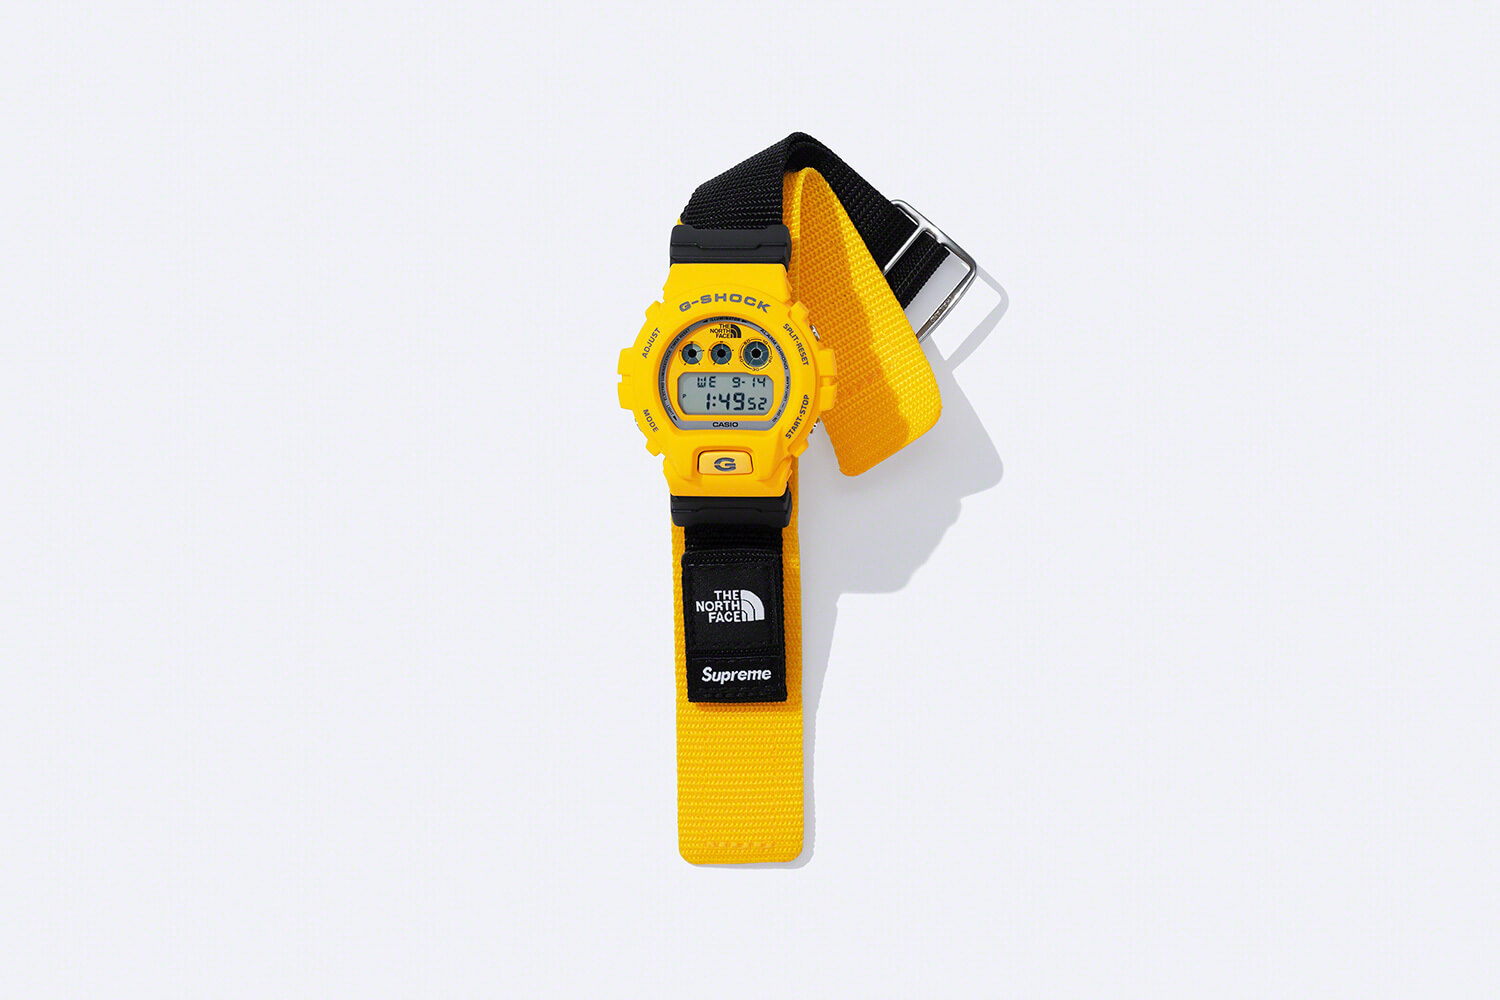 The Supreme x The North Face x G-Shock DW-6900 collaboration is ...